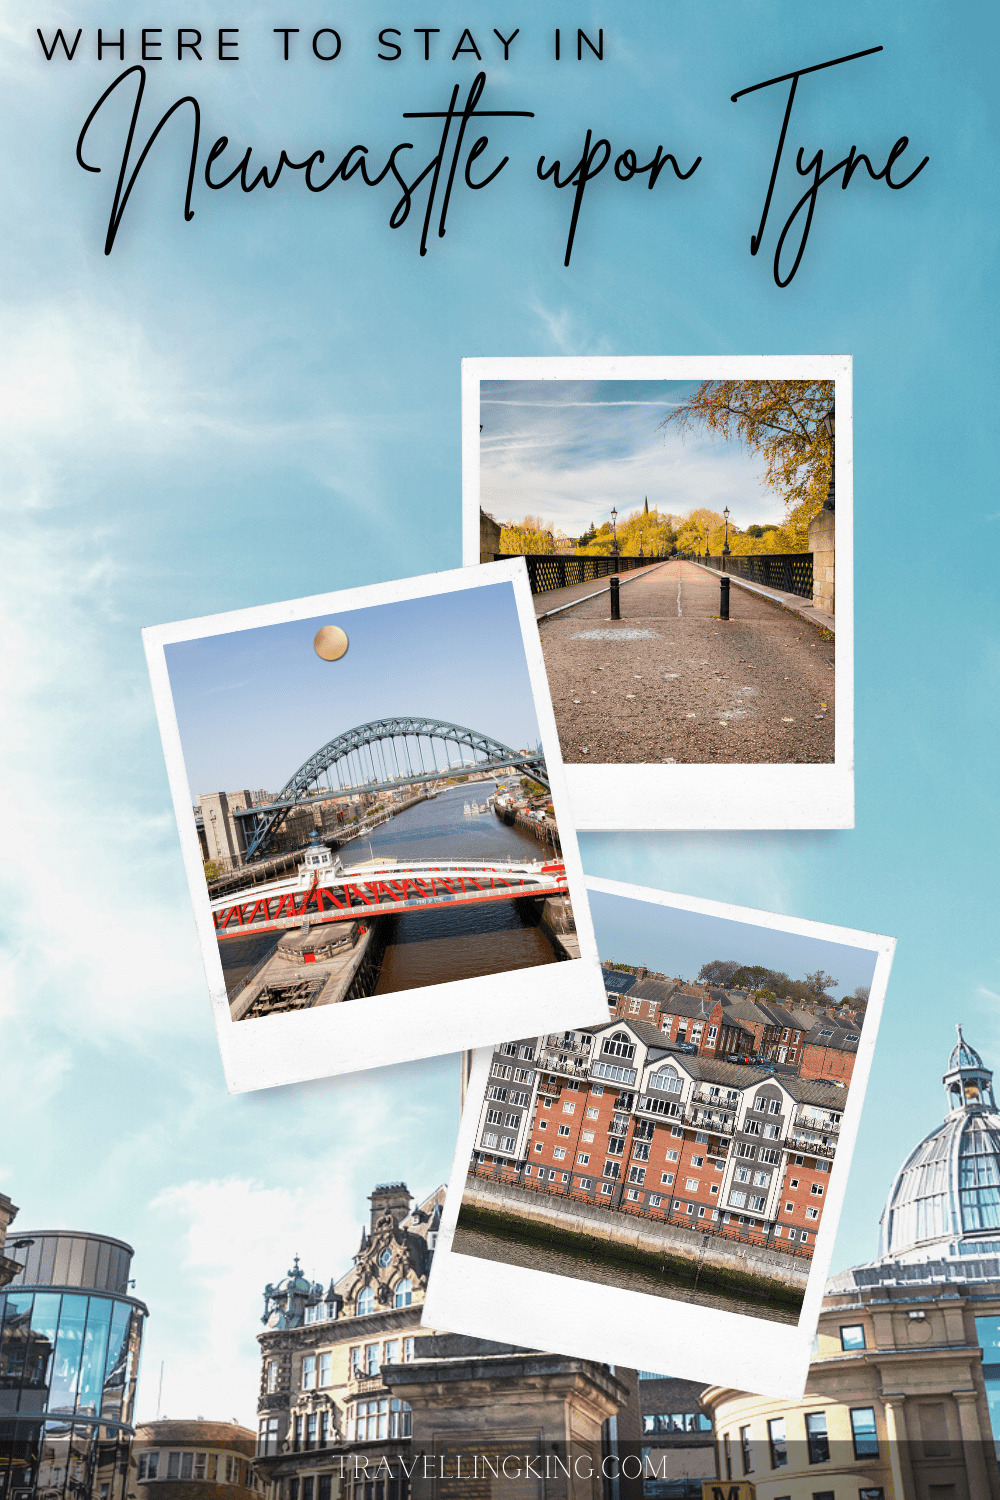 Where to stay in Newcastle upon Tyne